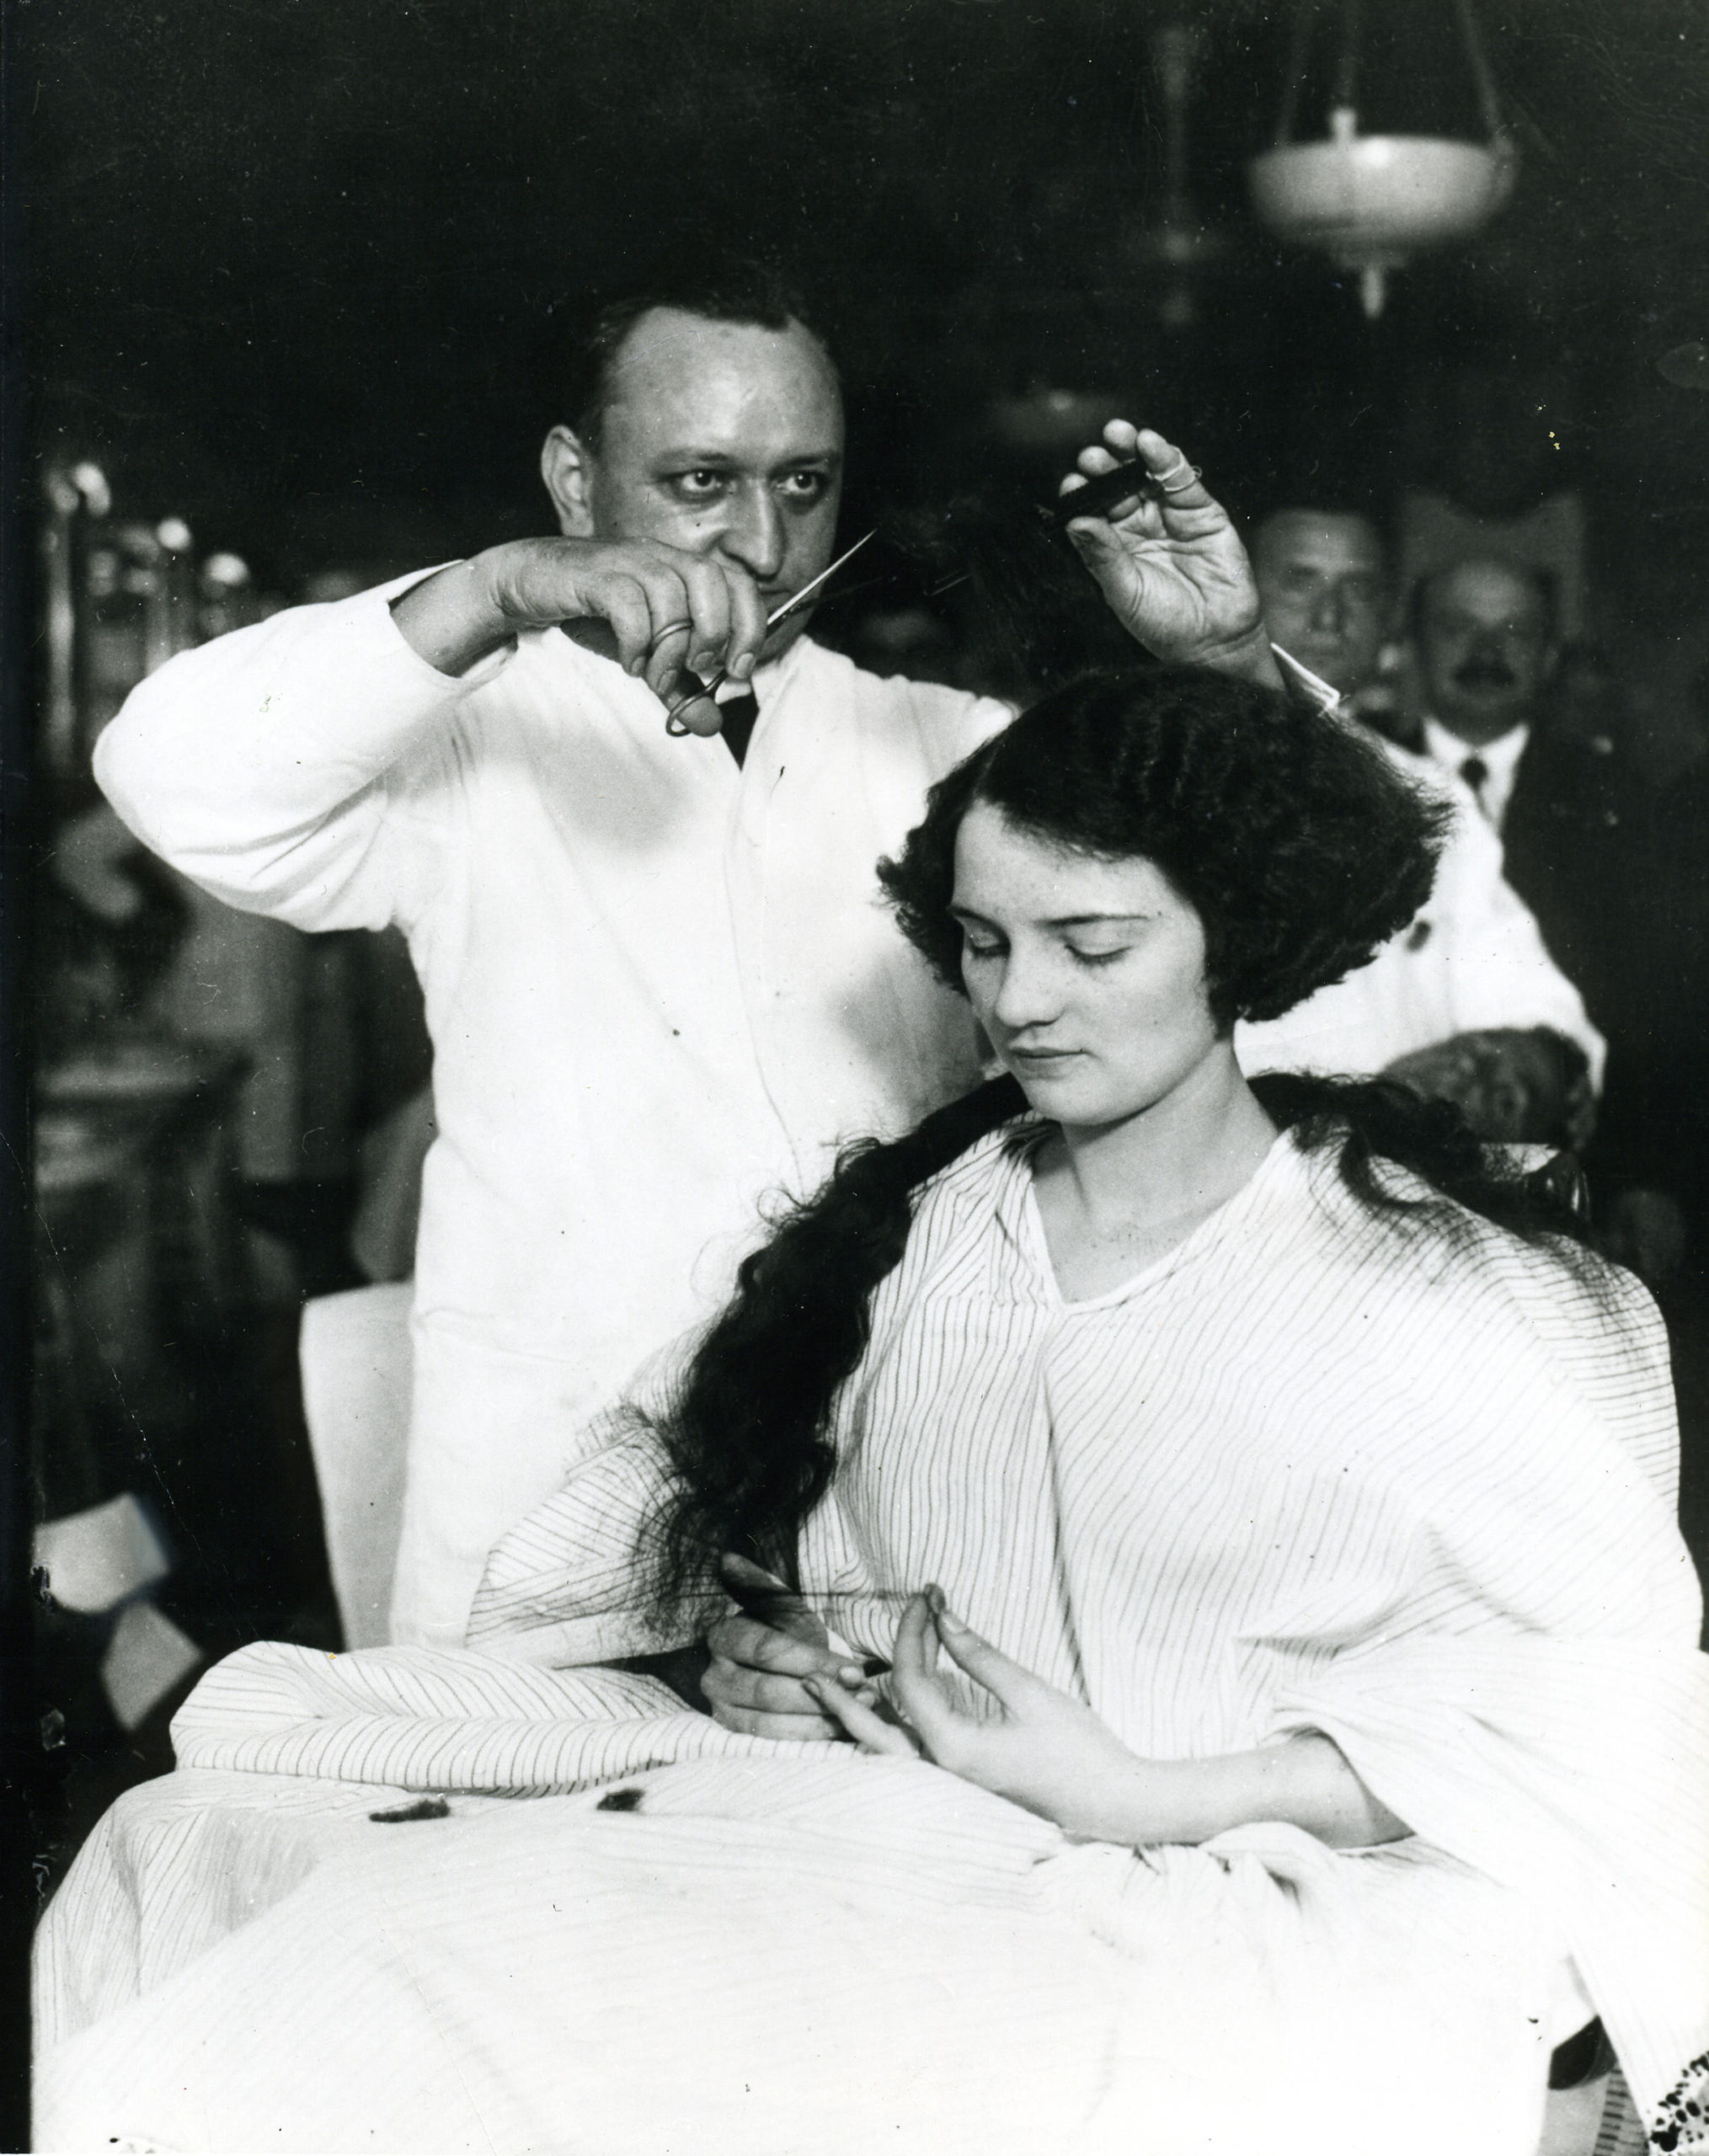 A young woman sits in a chair while a barber bobs her hair, circa 1920